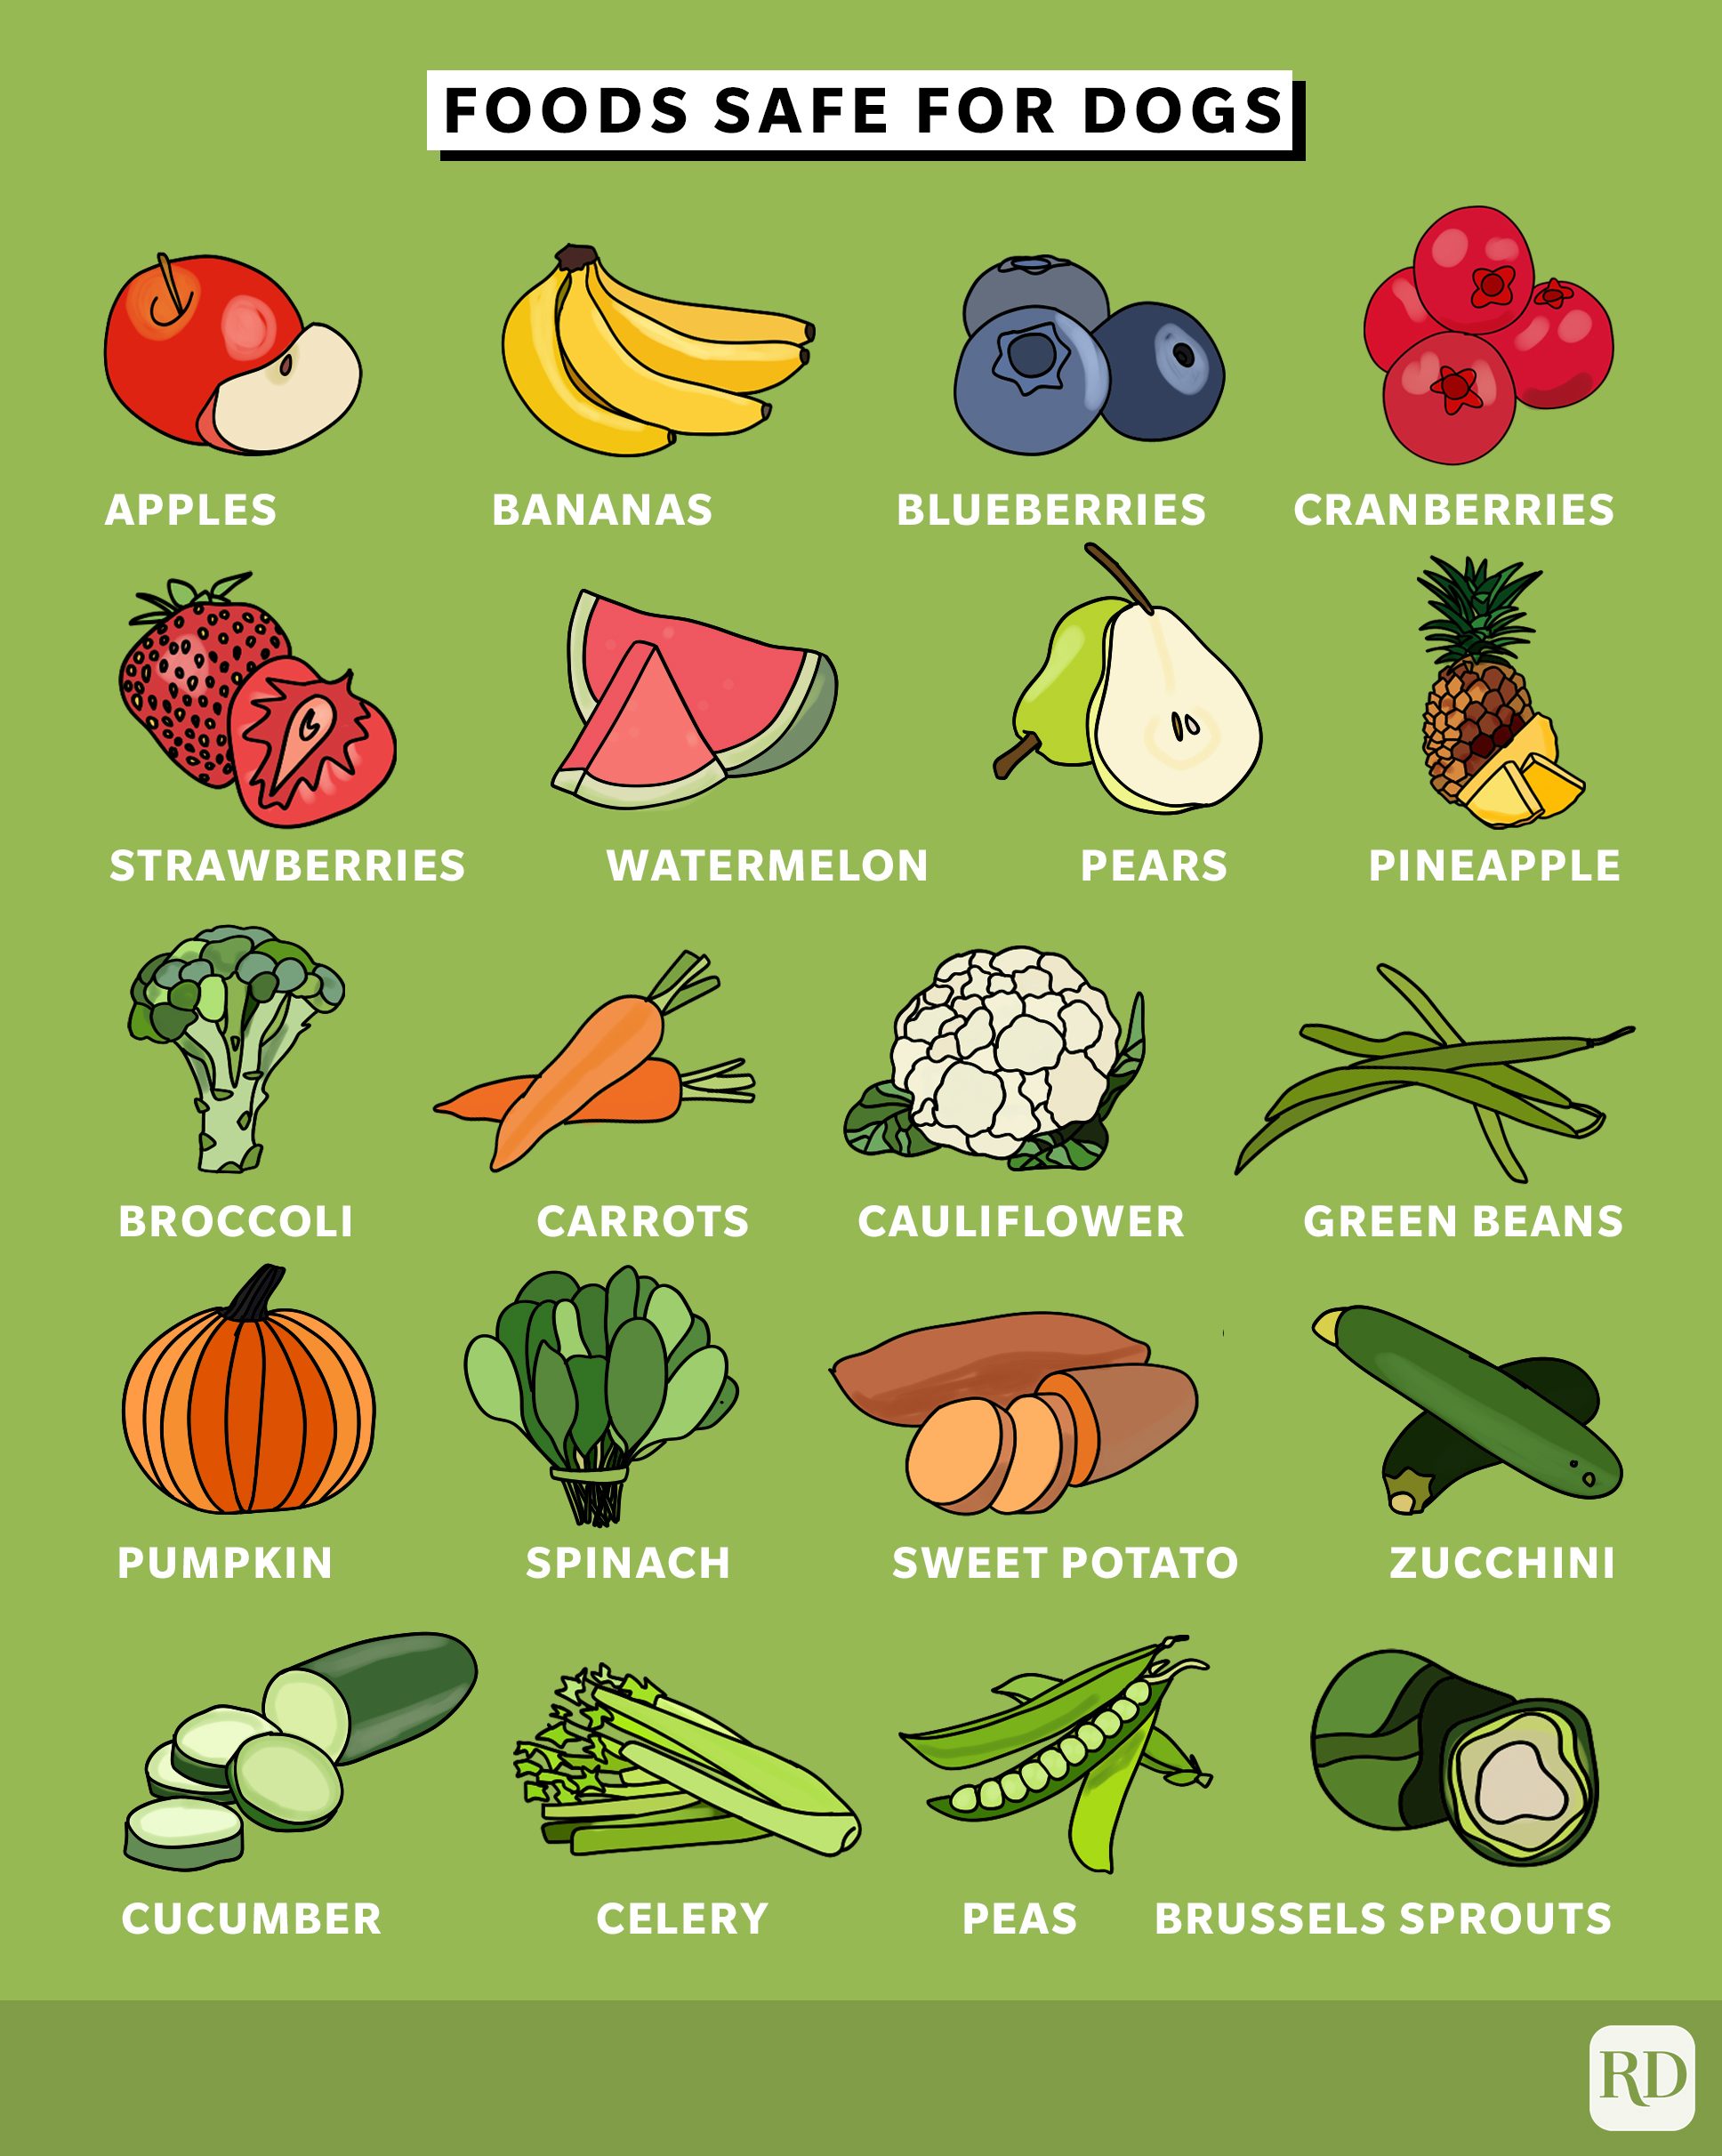 fruits-and-veggies-guide-for-dogs-coolguides